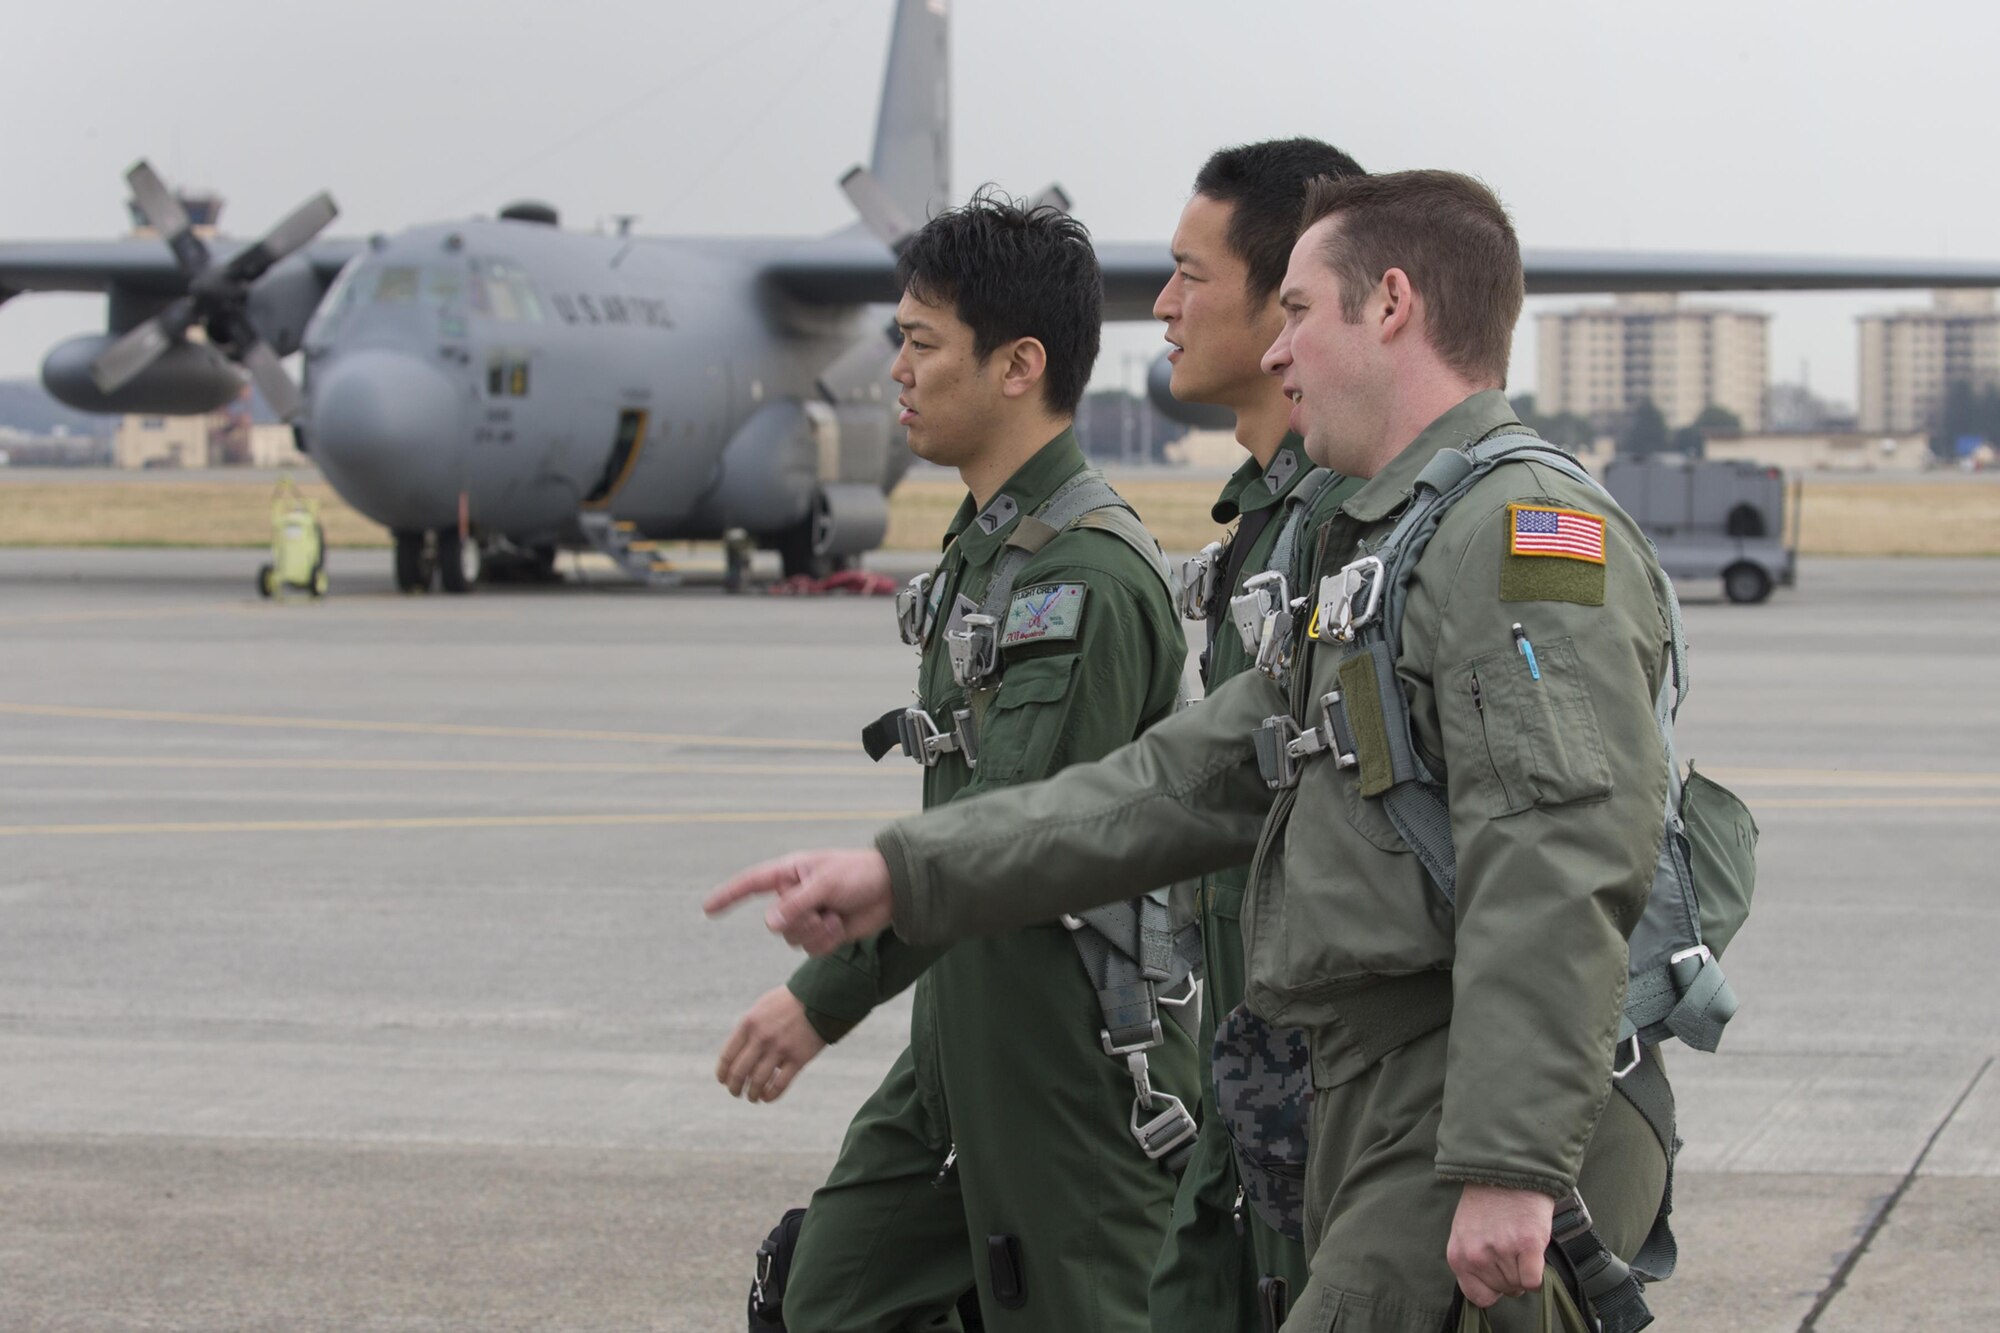 (Right to left) U.S. Air Force Master Sgt. Richard LaFrance, 36th Airlift Squadron C-130 loadmaster, talks to Japan Air Self-Defense Force Staff Sgt. Naoto Ishii, 403rd Tactical Airlift Squadron C-1 loadmaster, and JASDF Tech. Sgt. Suguru Yahata, Special Airlift Group B-747 loadmaster, at Yokota Air Base, Japan, March 23, 2016, during non-commission officer exchange program. Yokota hosted sixteen JASDF NCO members in various work-places for nine days. (U.S. Air Force photo by Osakabe Yasuo/Released)